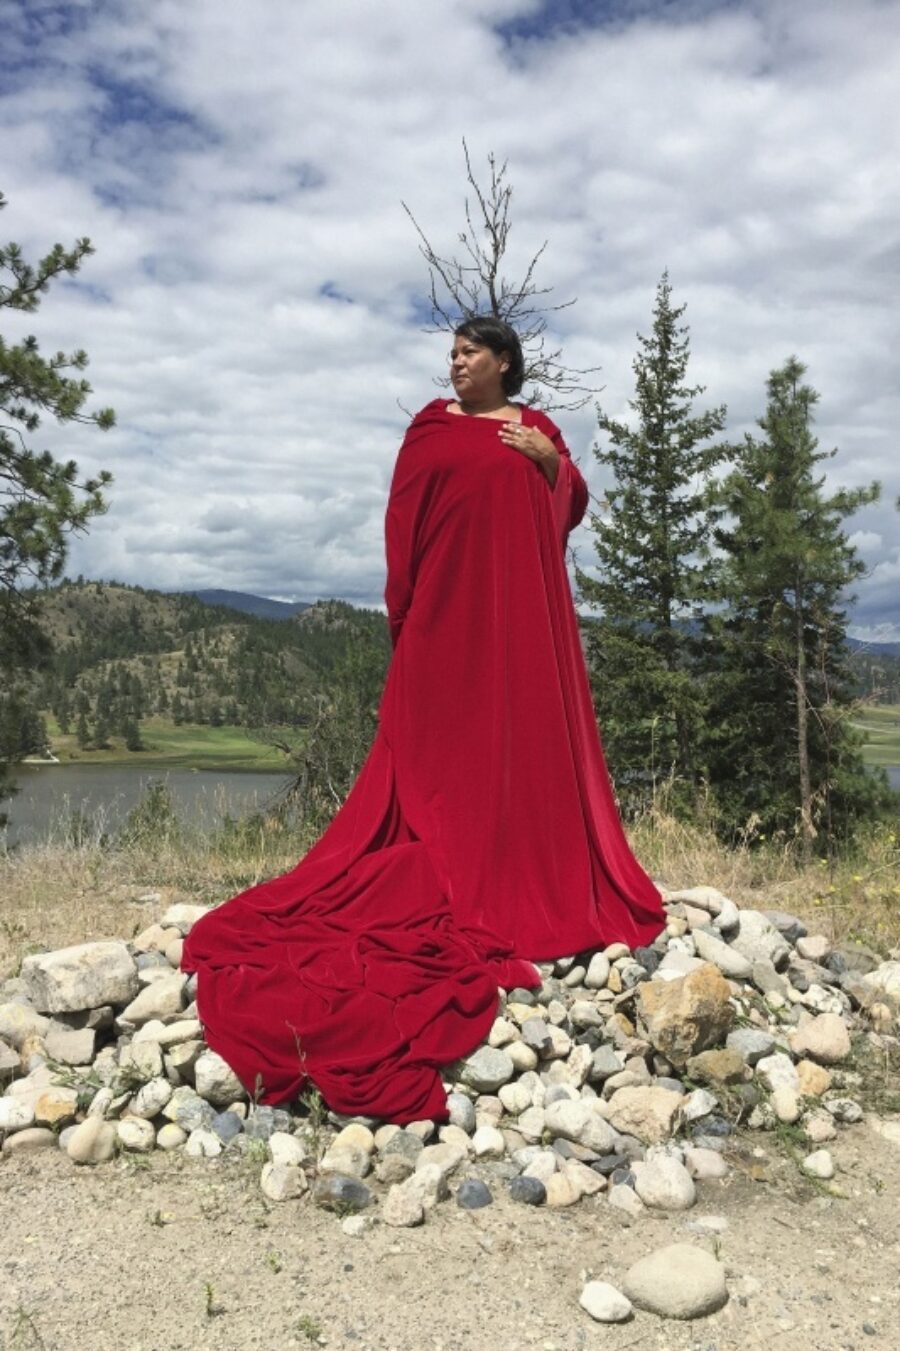 Lori Blondeau stands confidently on a pile of rock in a landscape while wearing a long red dress.